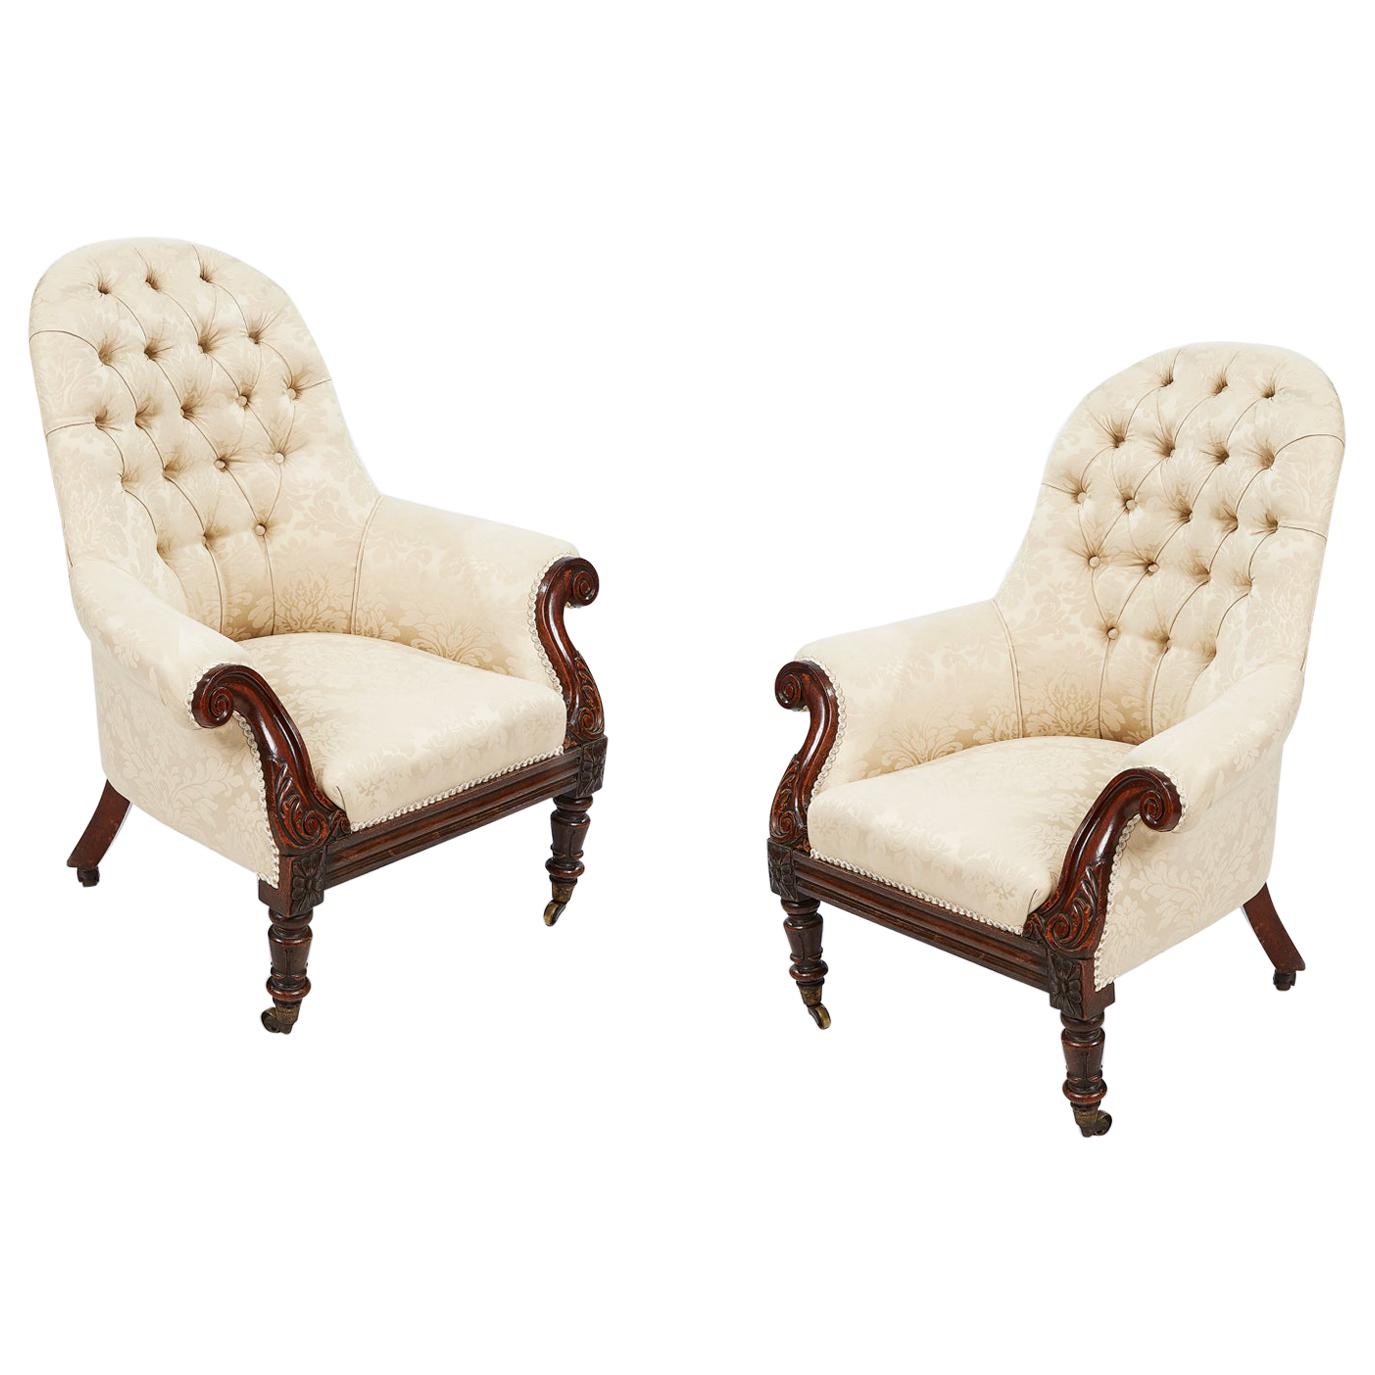 19th Century Pair of Round-back Upholstered Armchairs For Sale